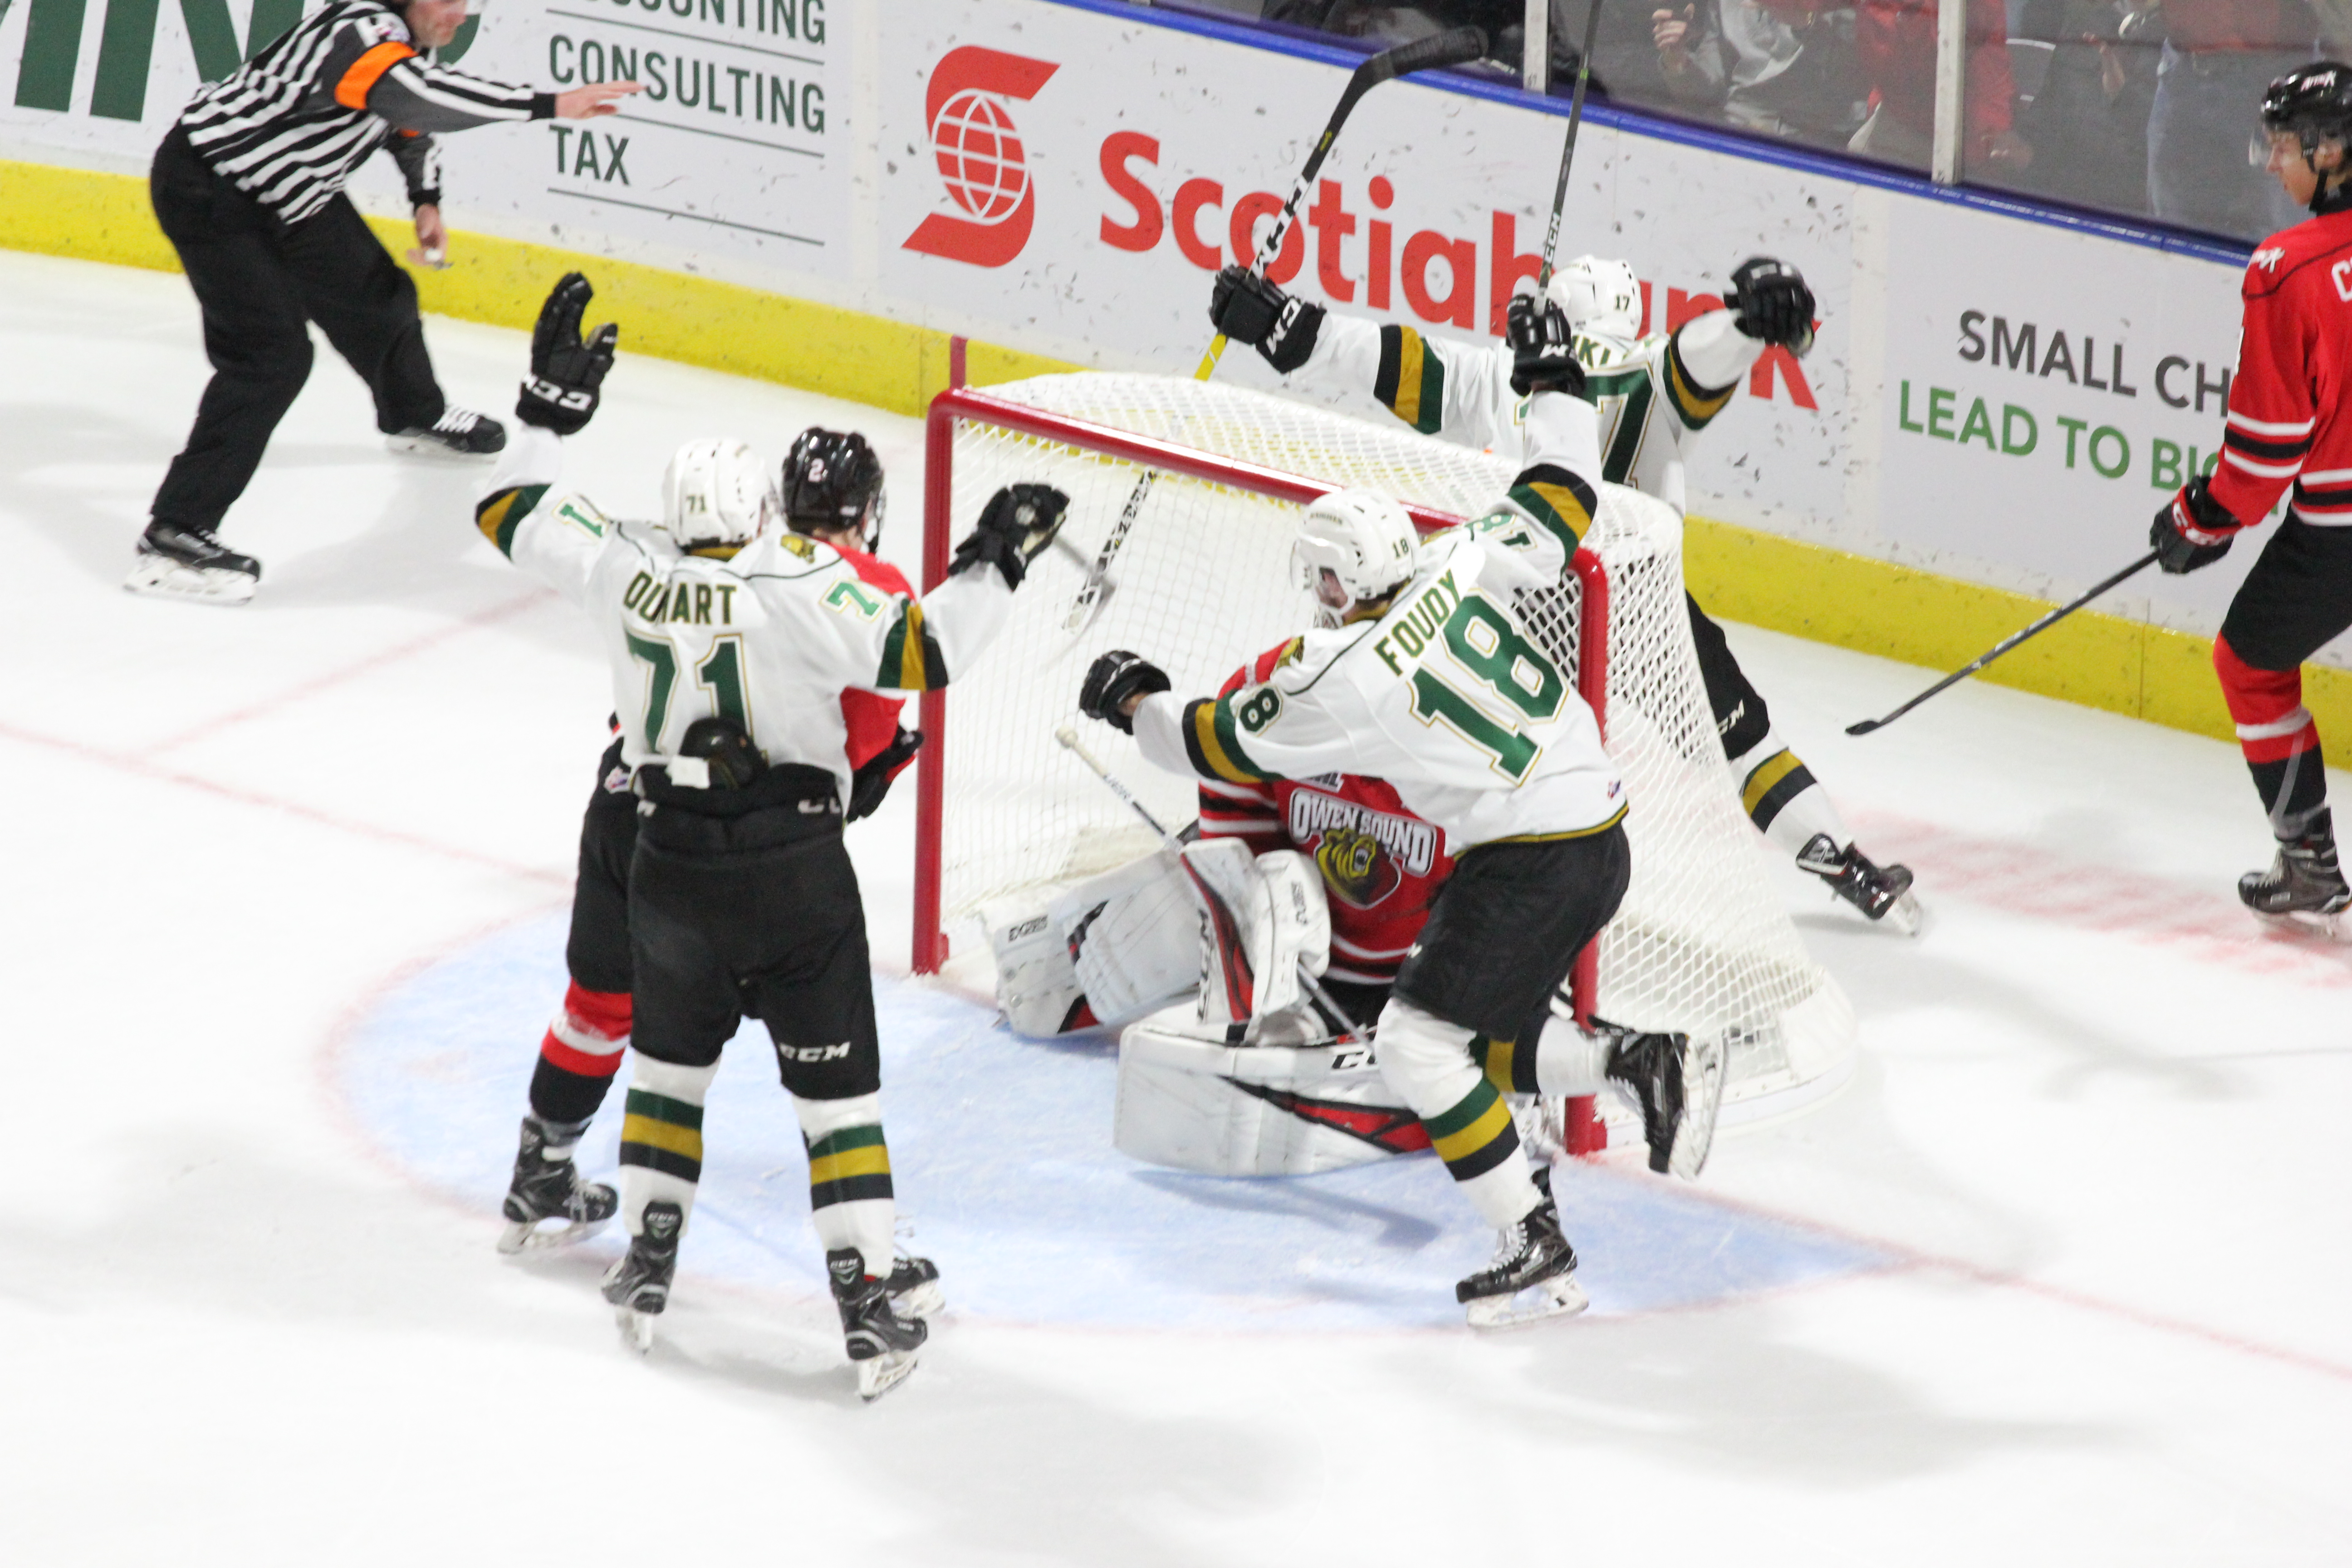 London Knights set to host Owen Sound in home opener